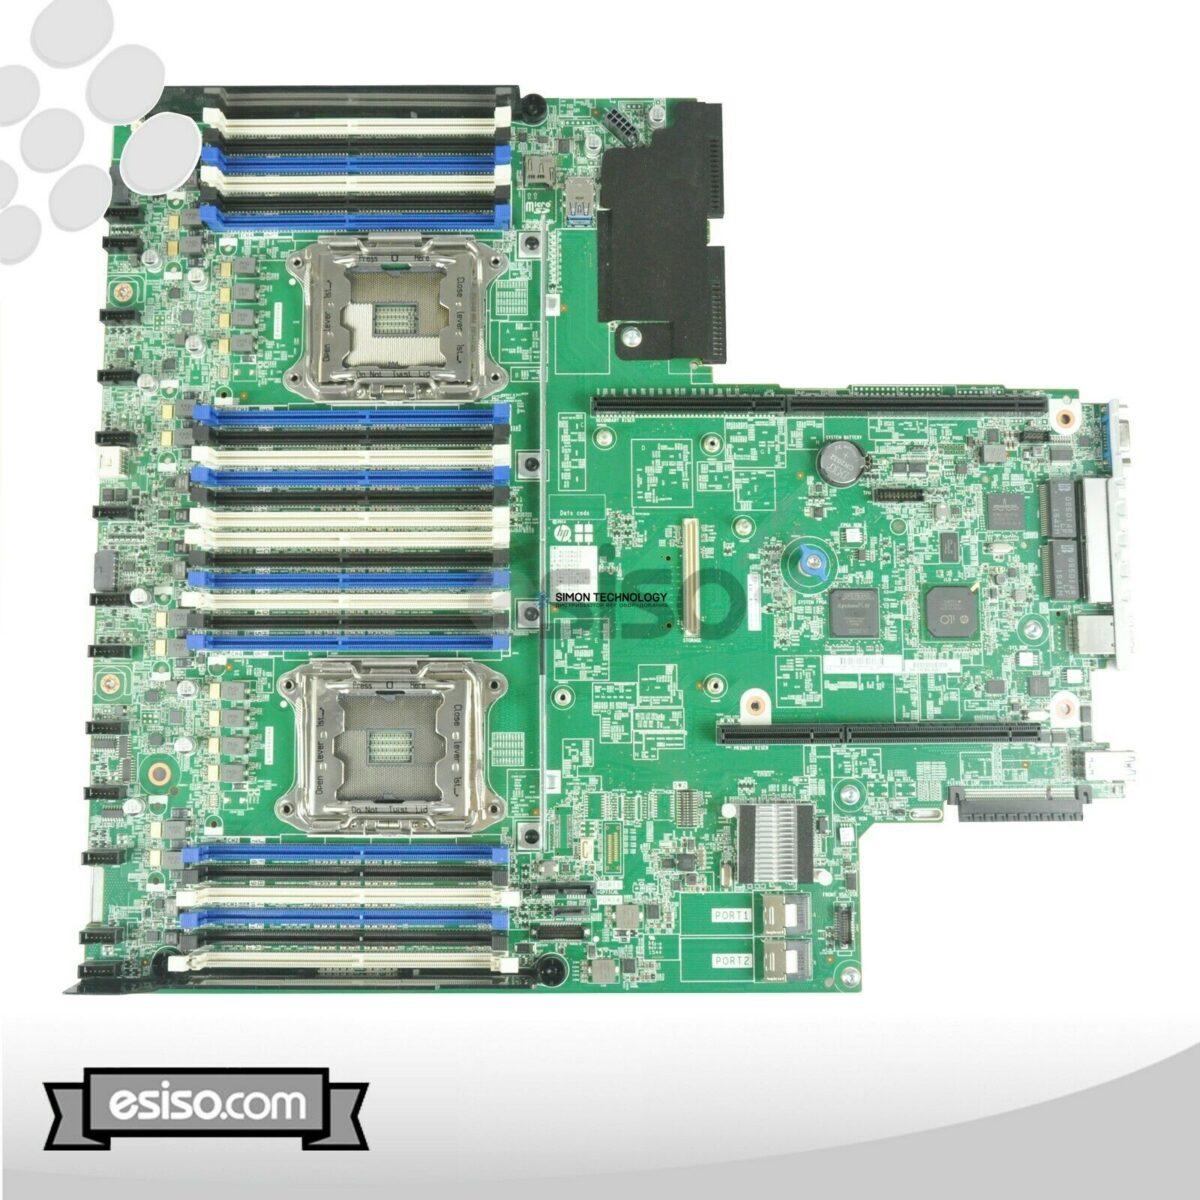 HP HP DL360/DL380 G9 SYSTEM BOARD - UPGRADED TO V4 (729842-001-EB)